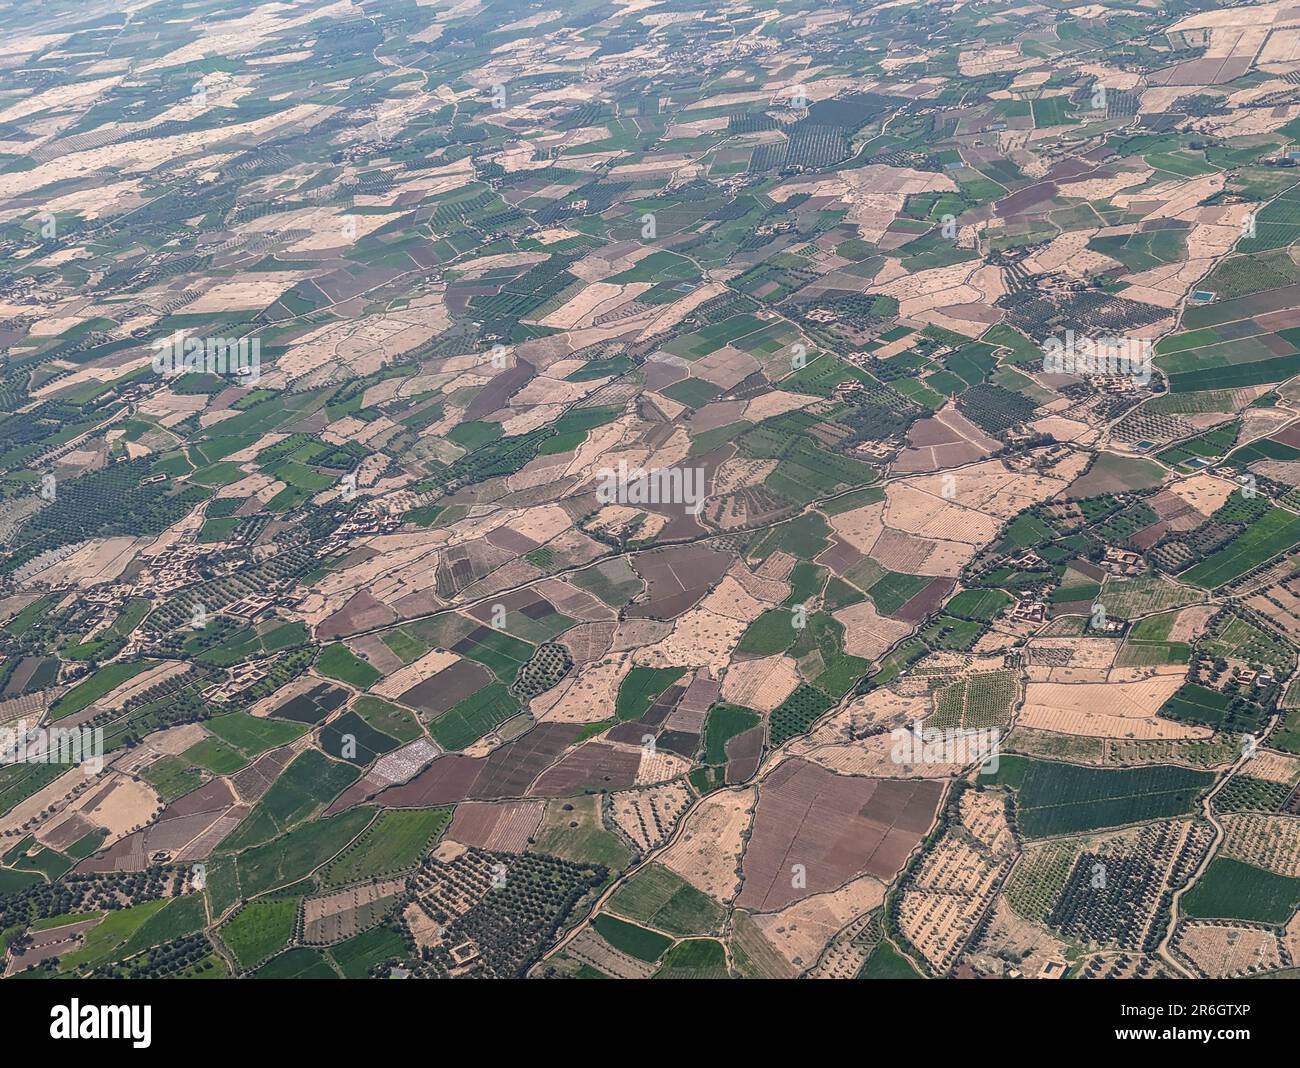 Aerial view of Moroccan countryside seen from an airplane Stock Photo